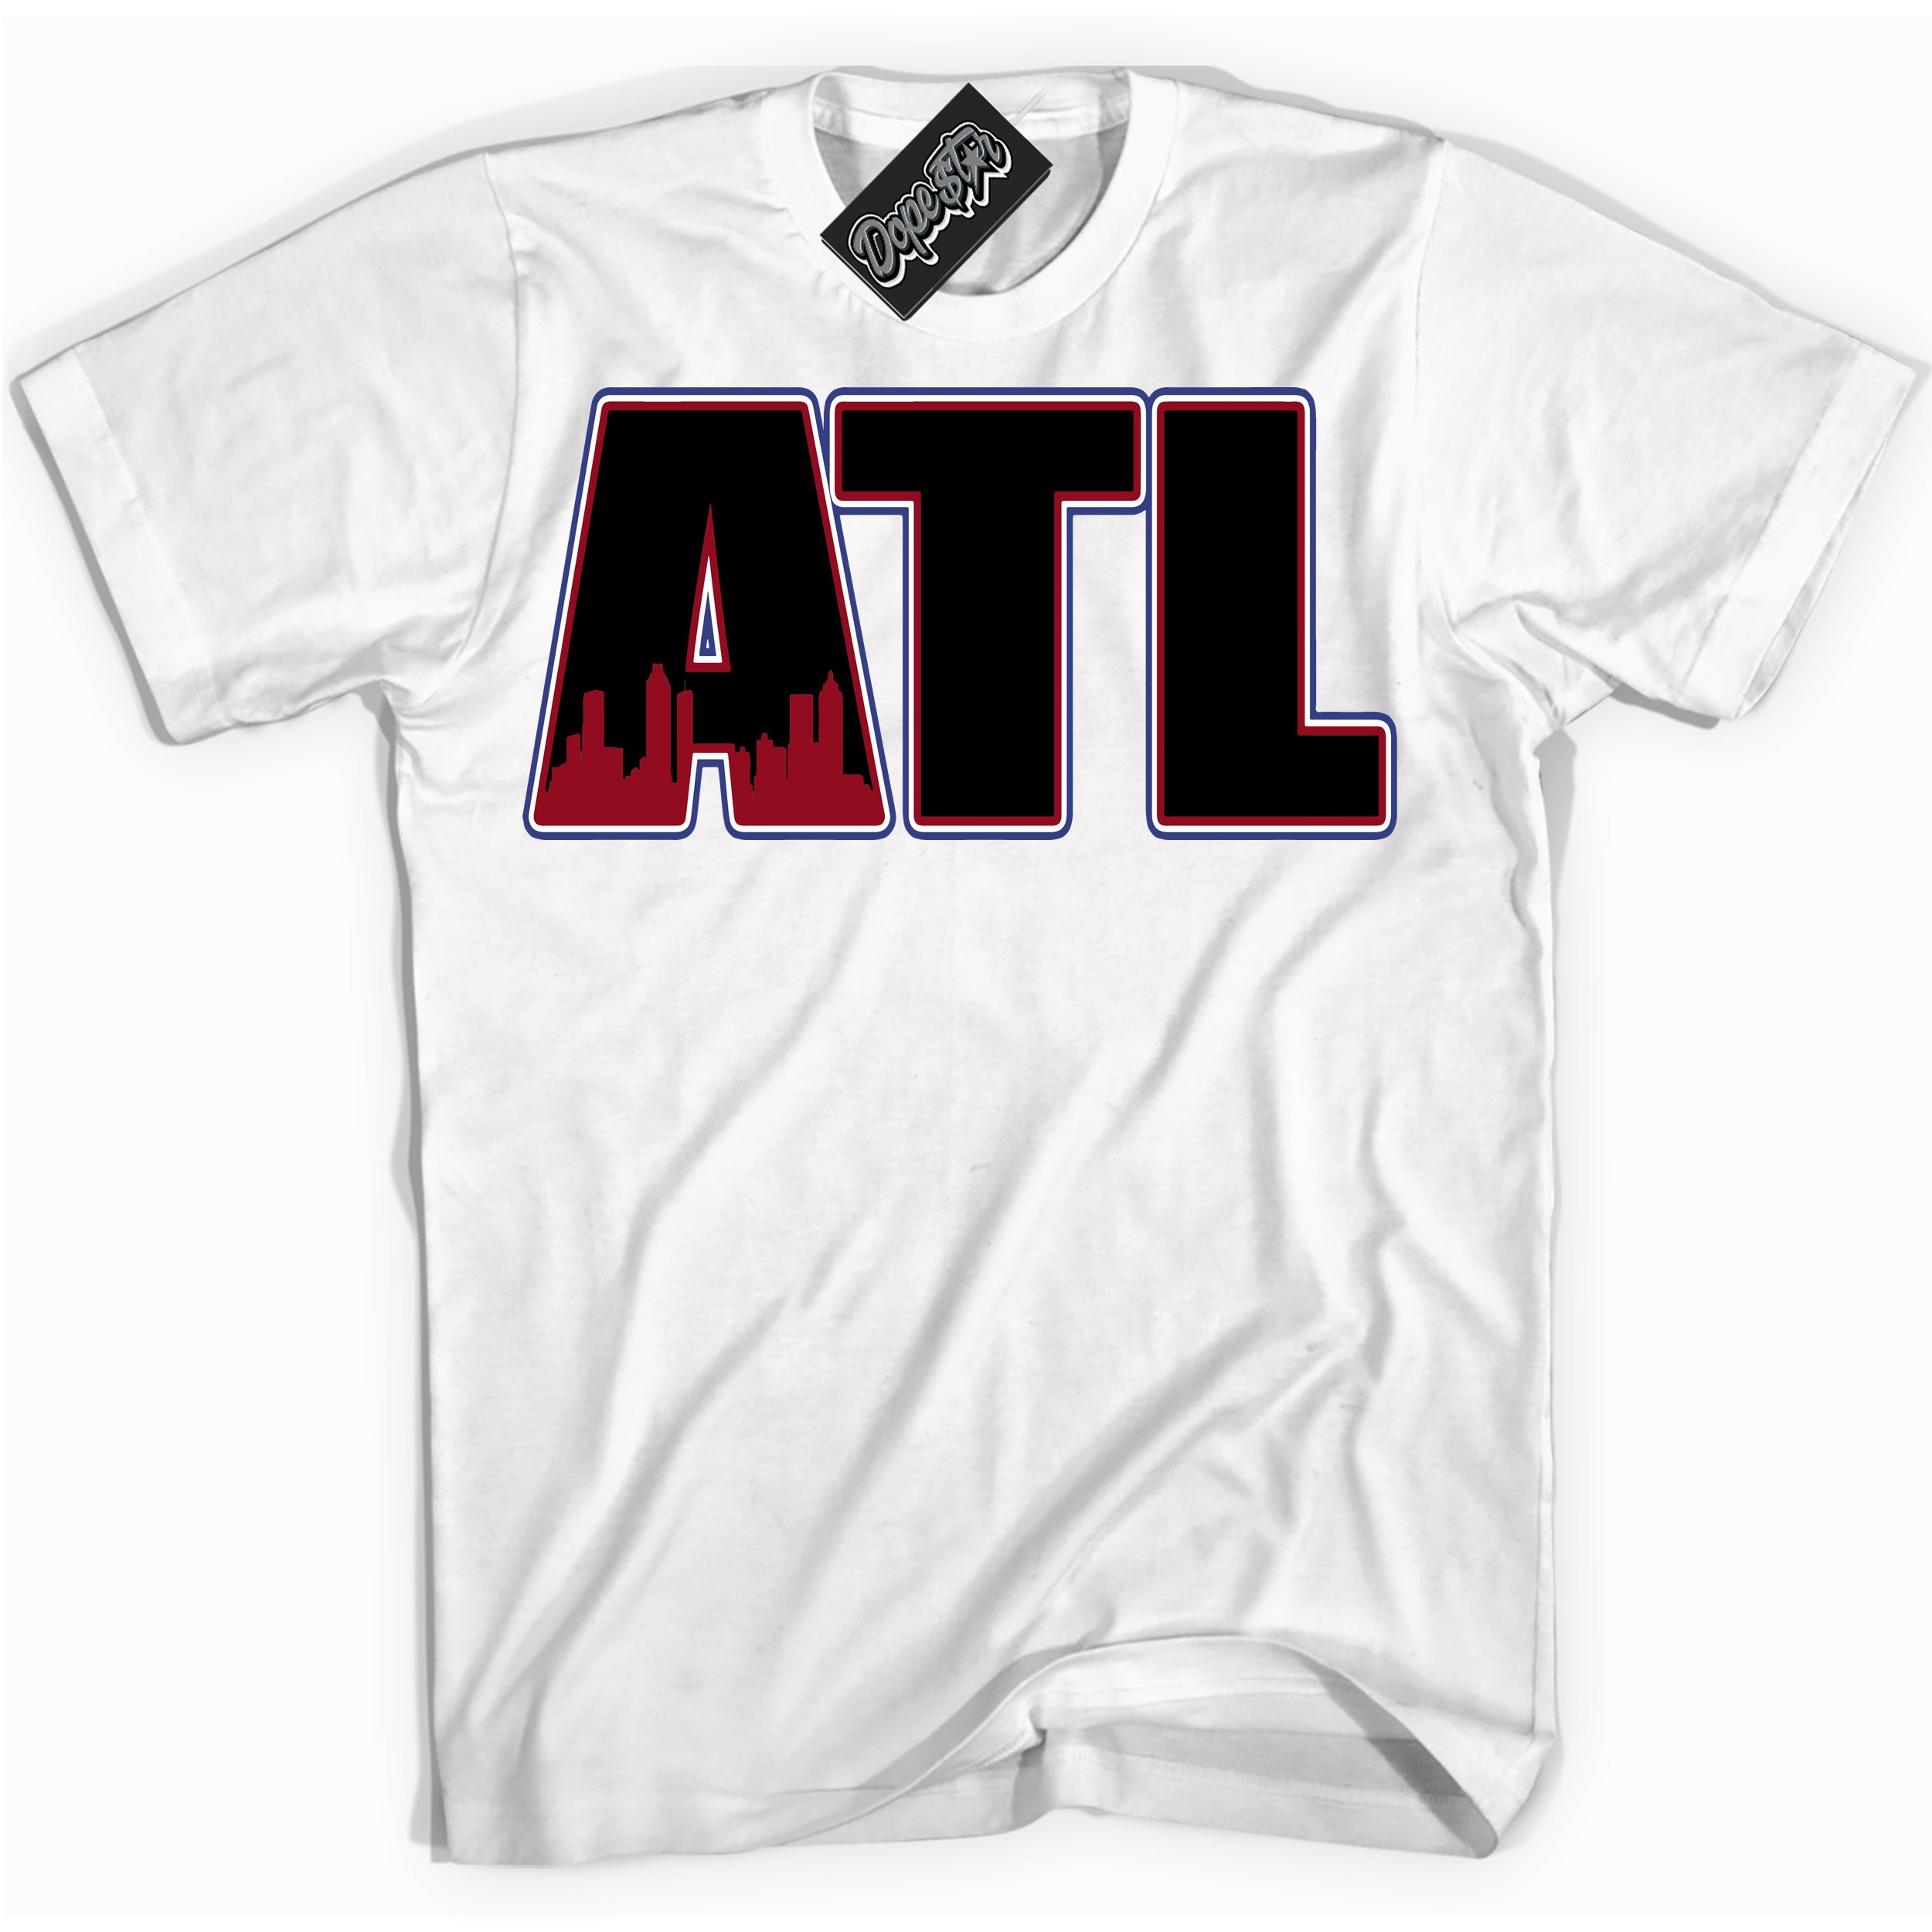 Cool White Shirt with “ Atlanta ” design that perfectly matches Playoffs 8s Sneakers.